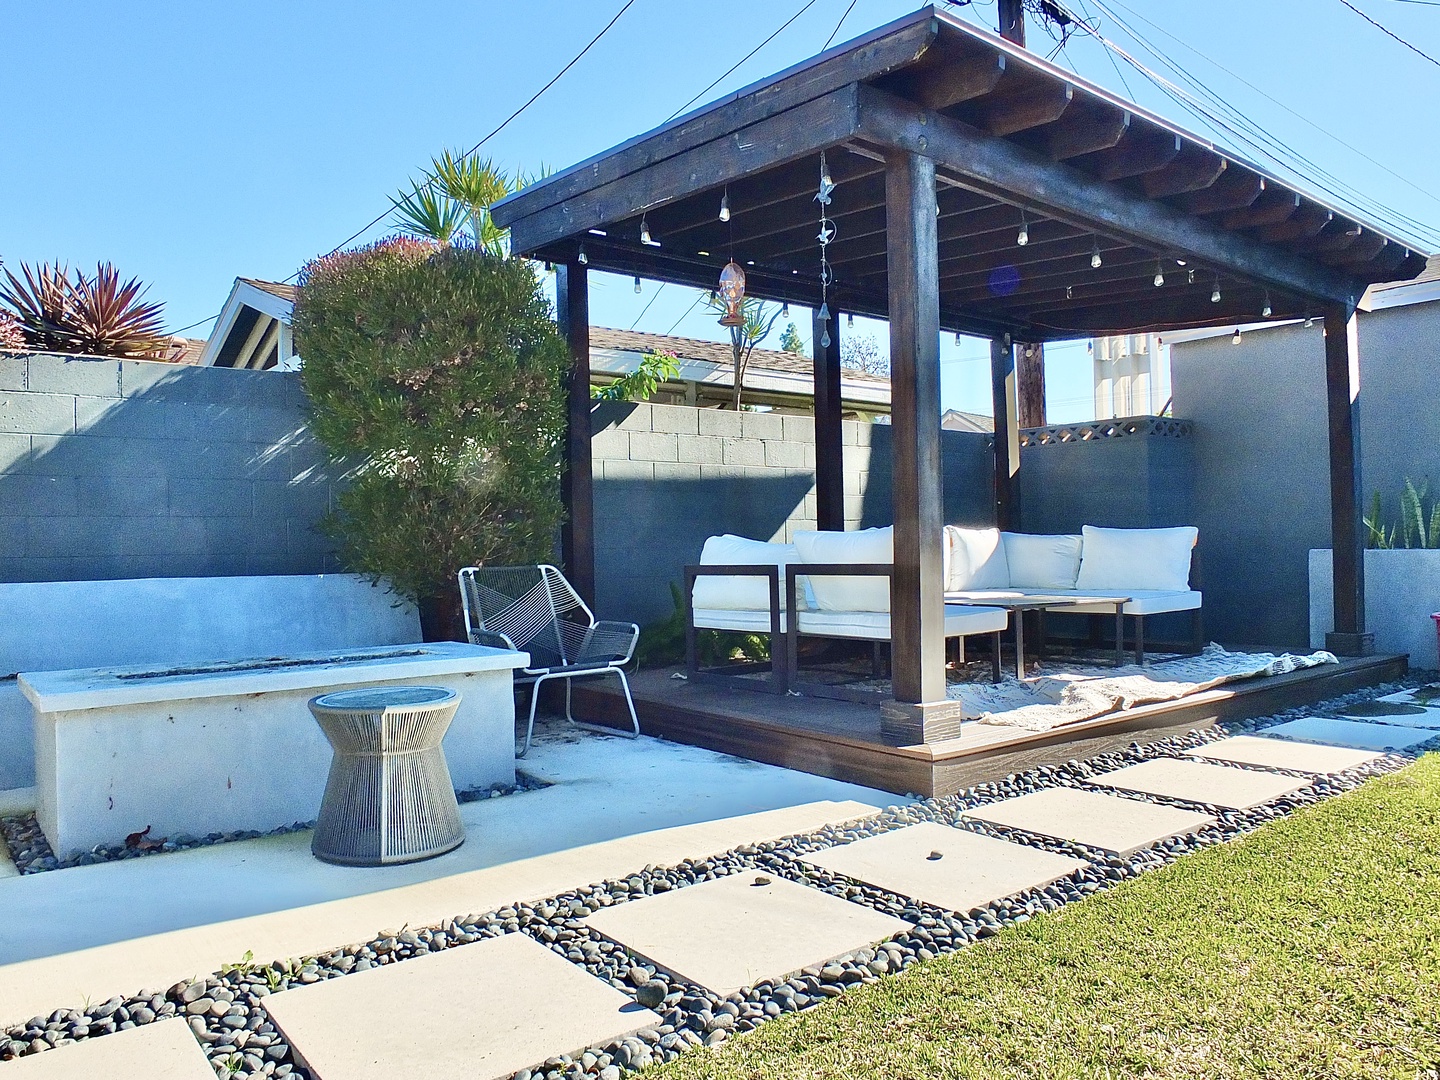 Gather around the firepit or unwind in the shade of the pergola